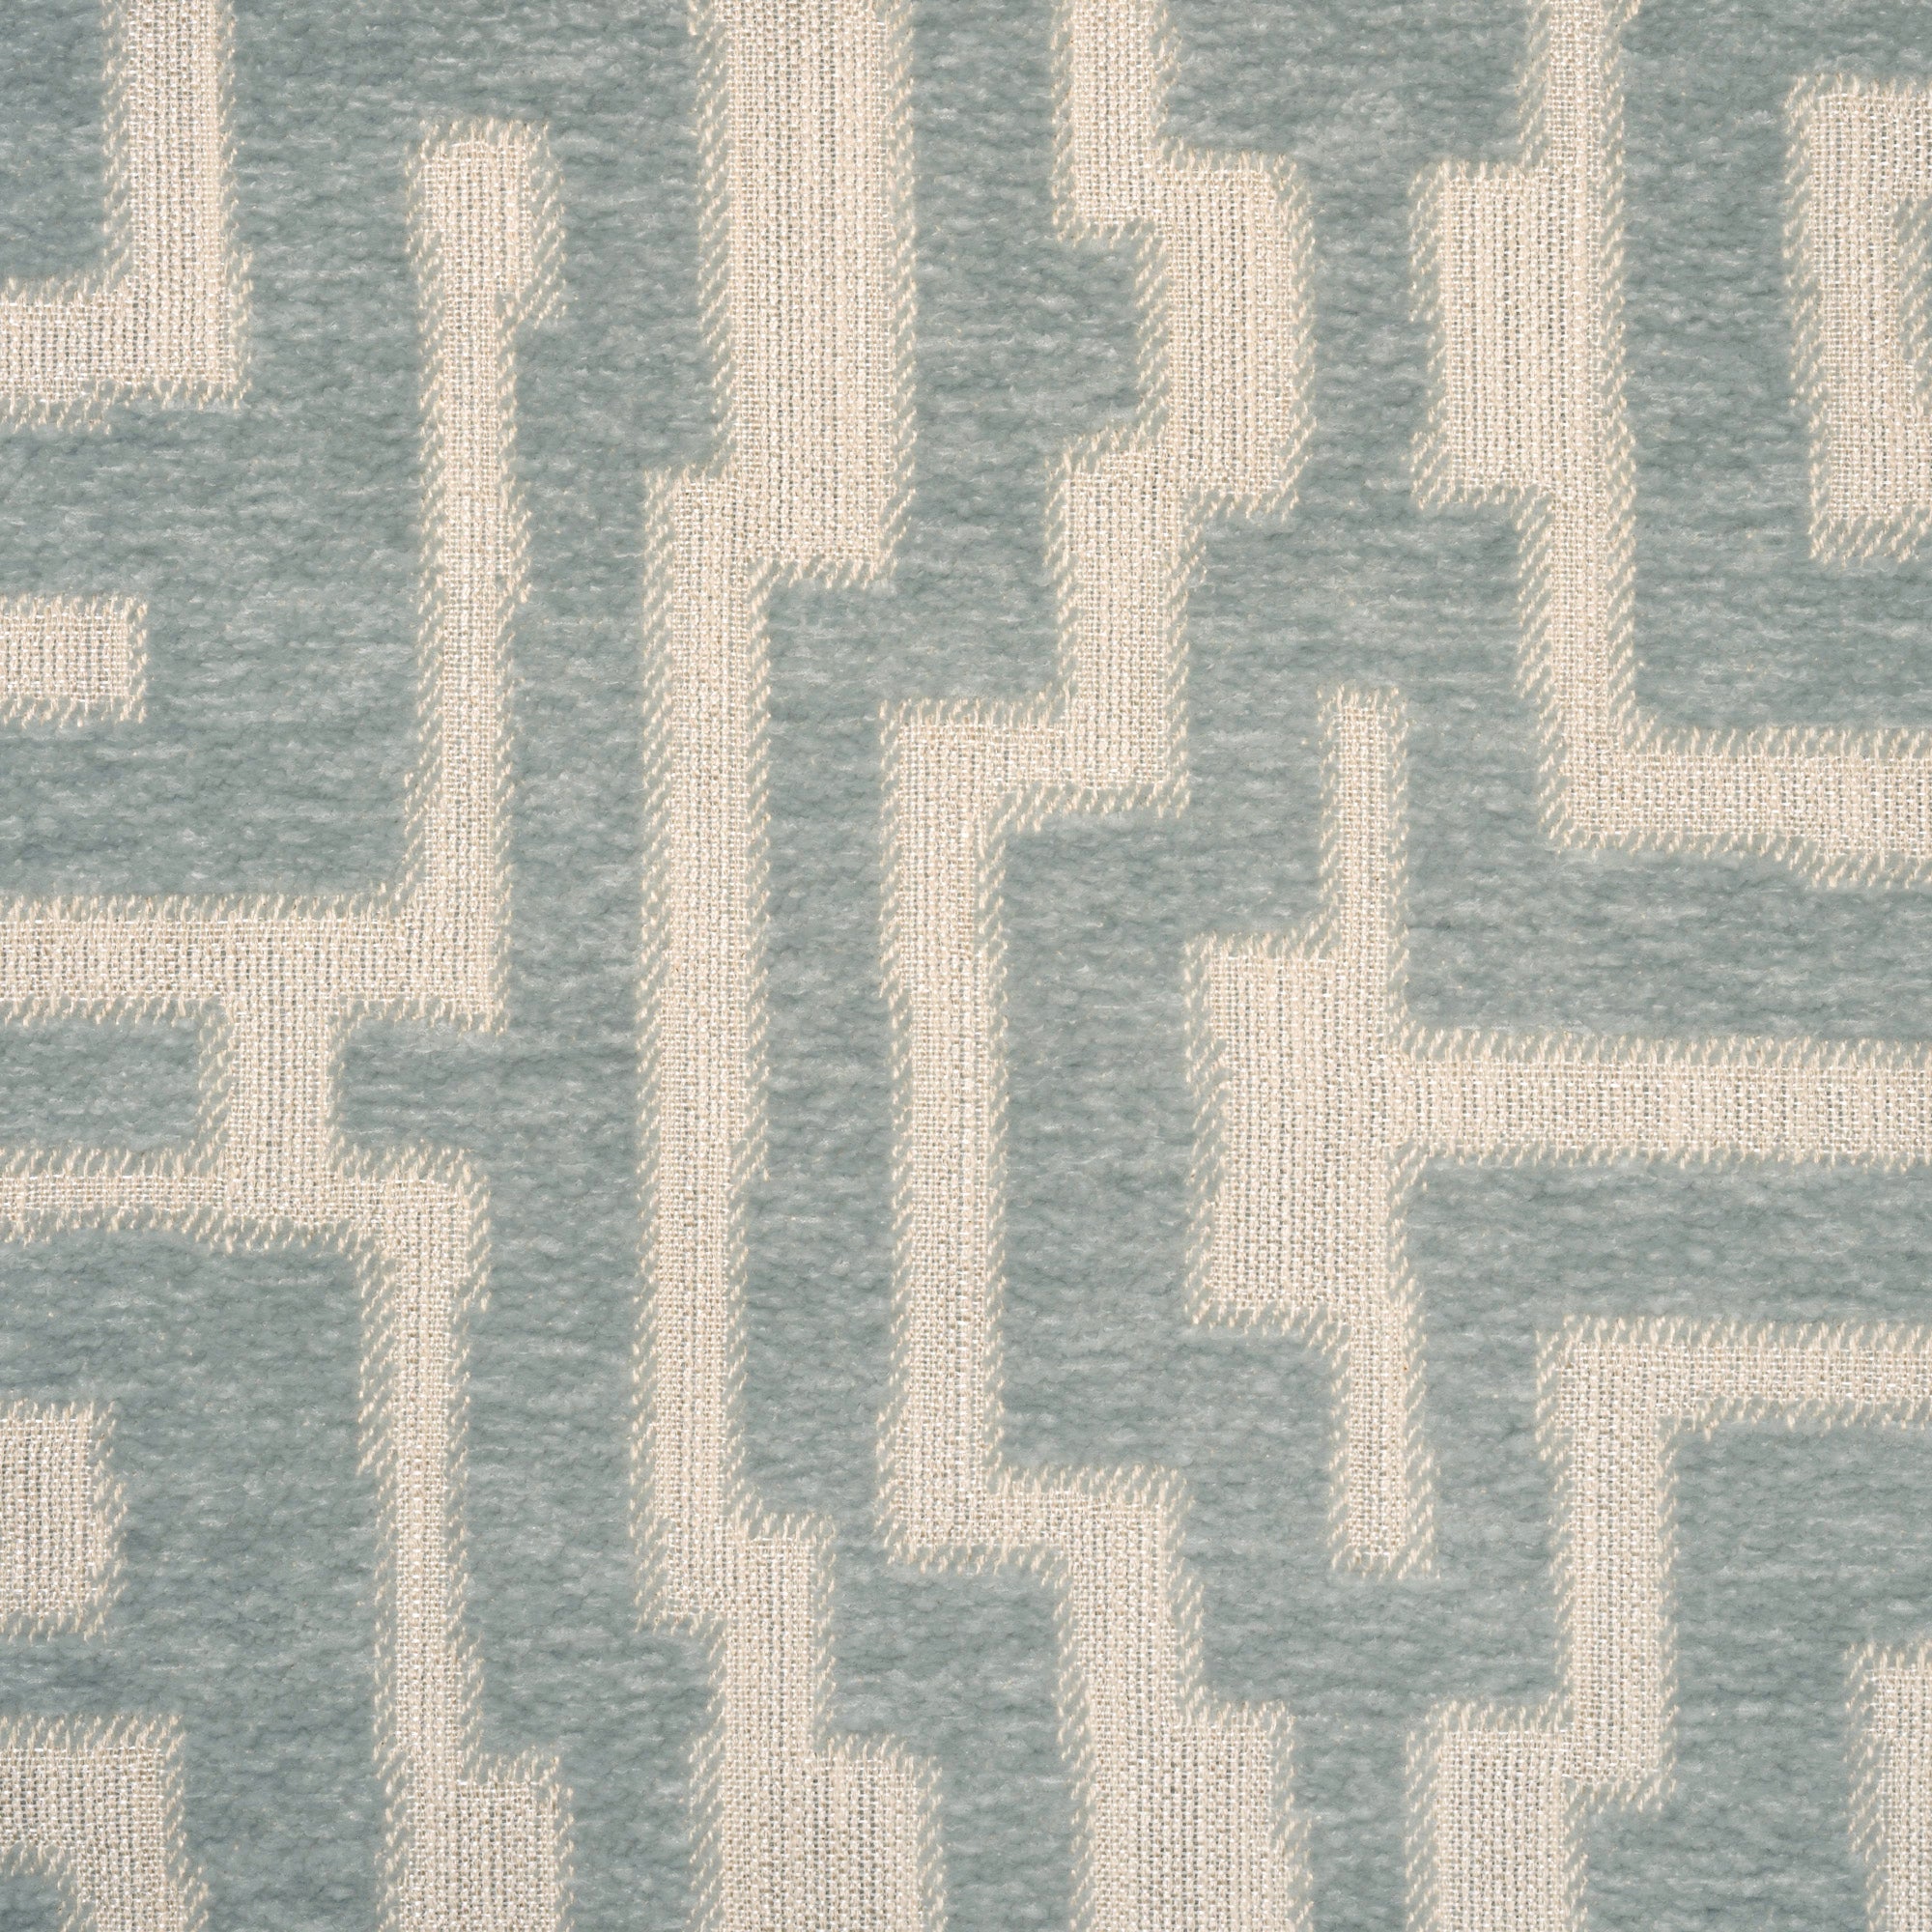 Hercules Steel Mist Chenille Basketweave Upholstery Fabric by the yard